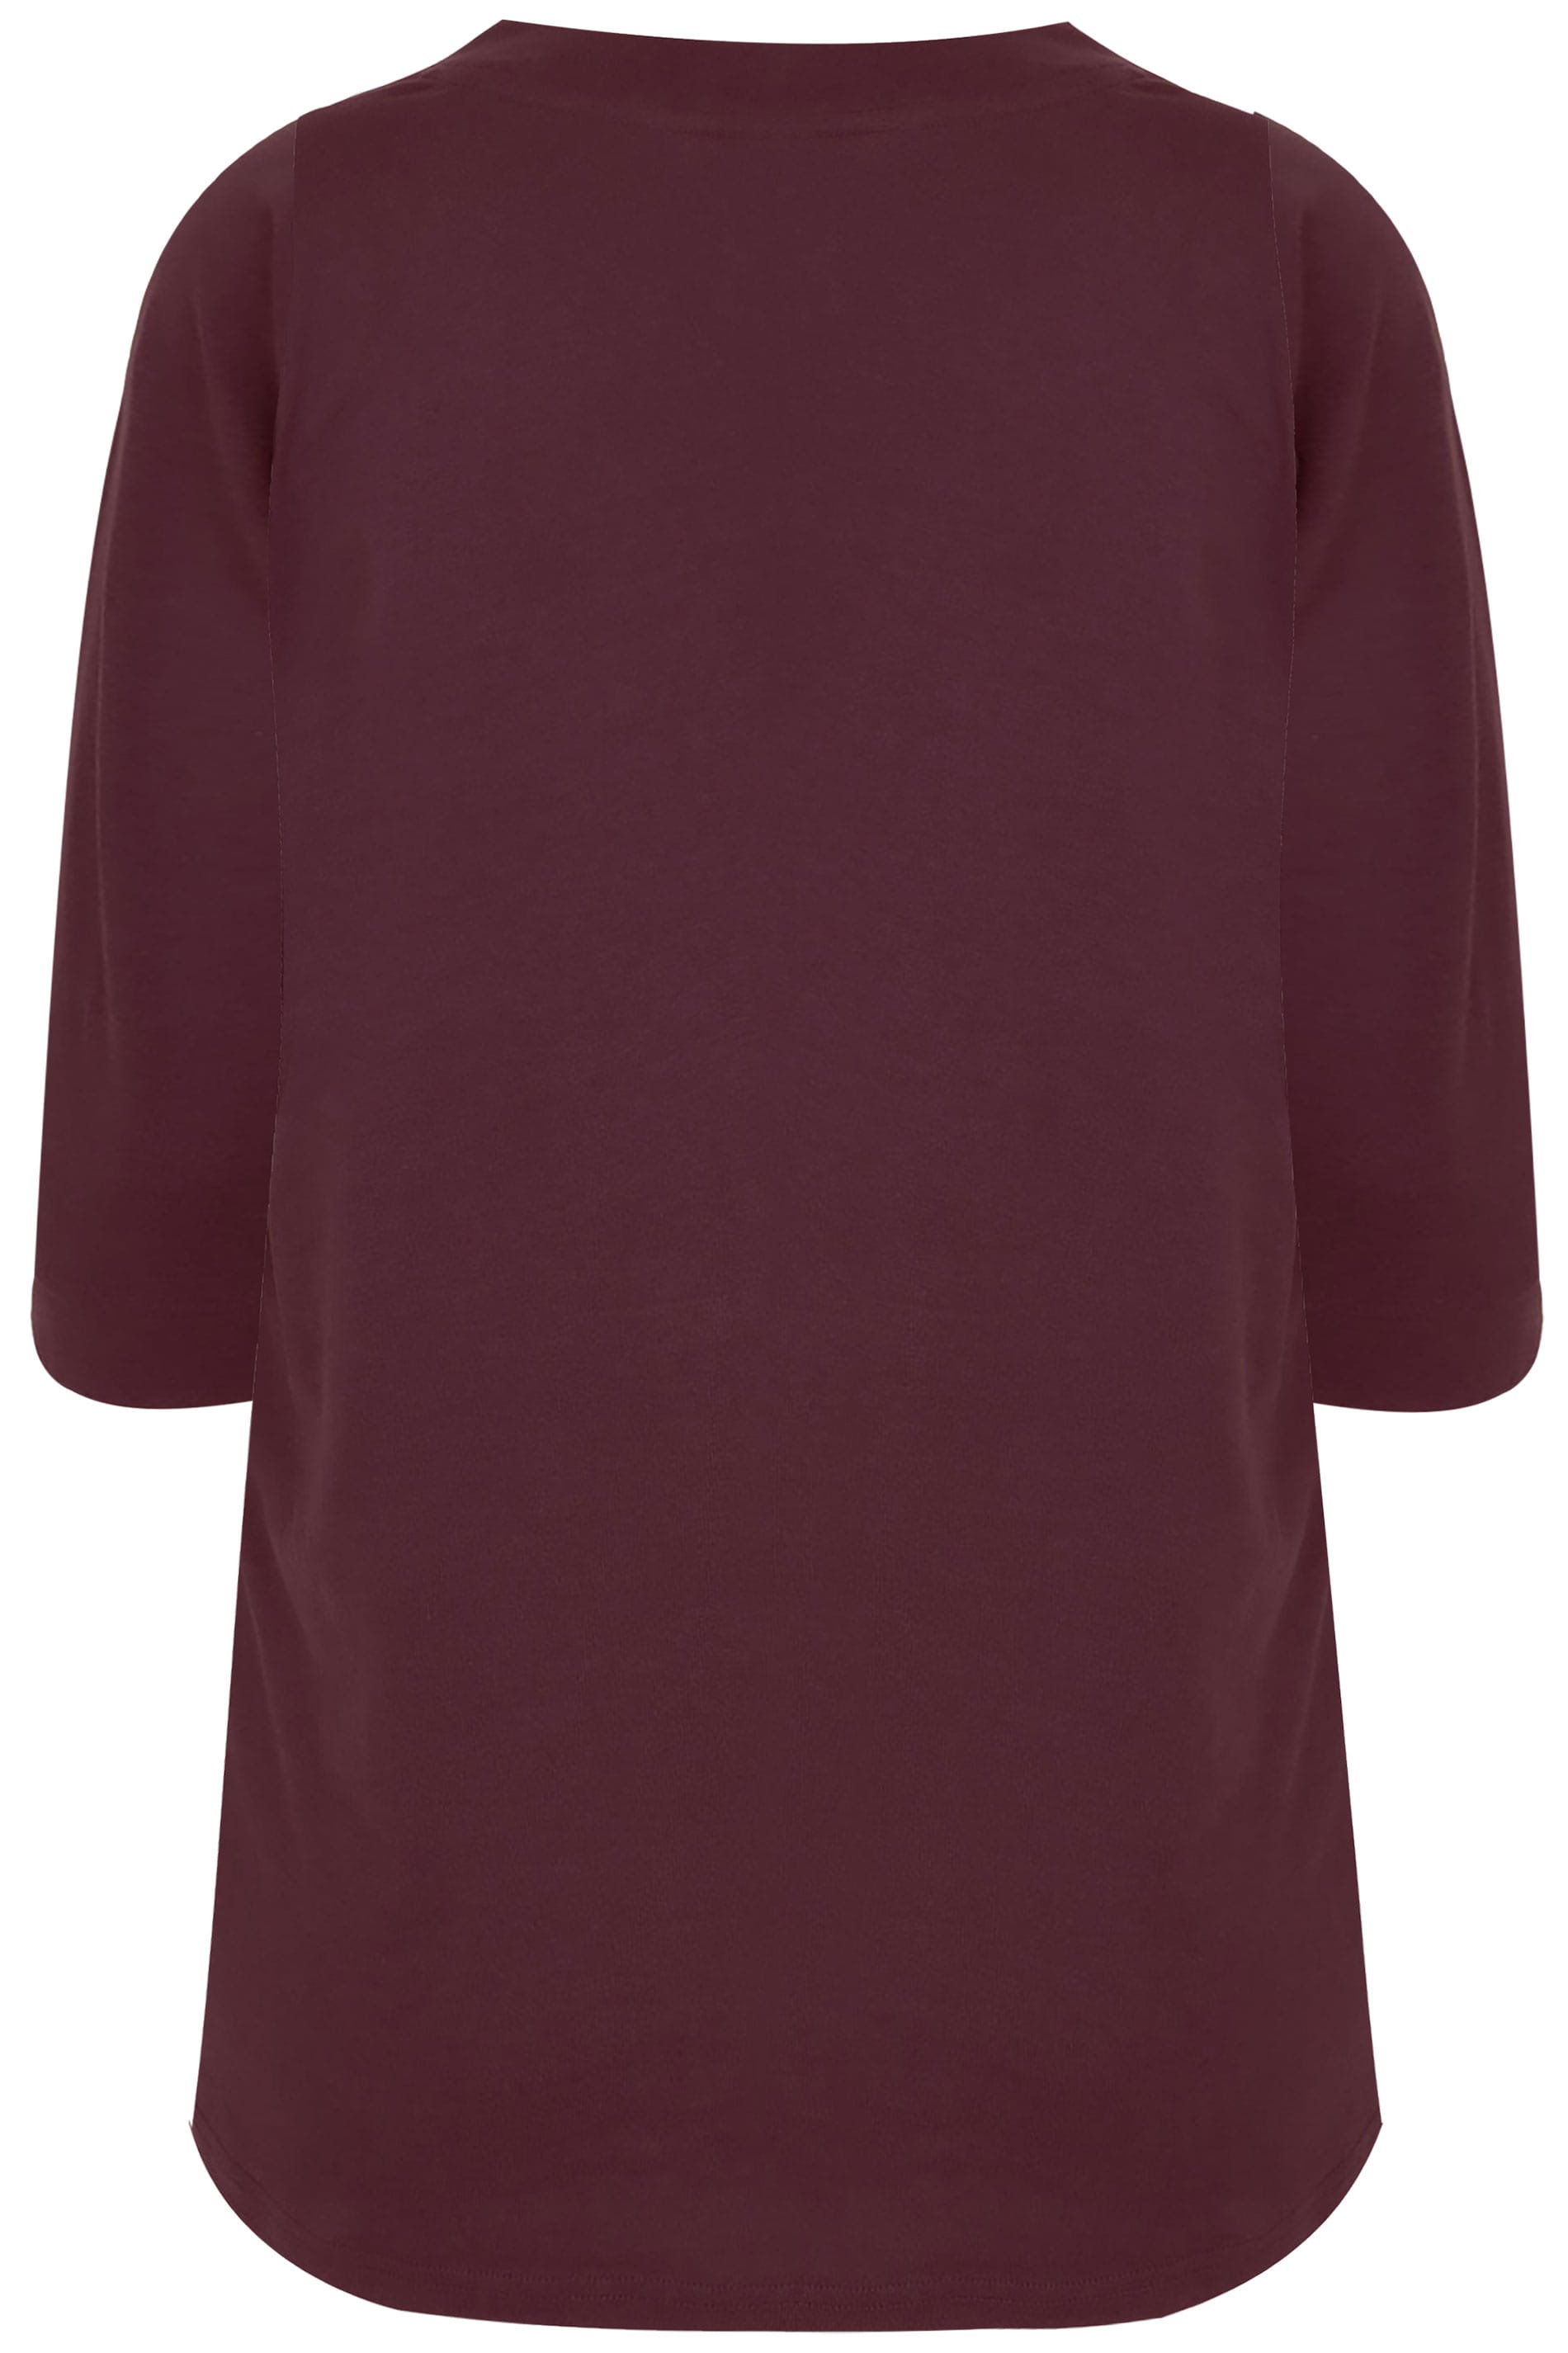 Burgundy Band Scoop Neckline T-Shirt With 3/4 Sleevess, Plus size 16 to 36